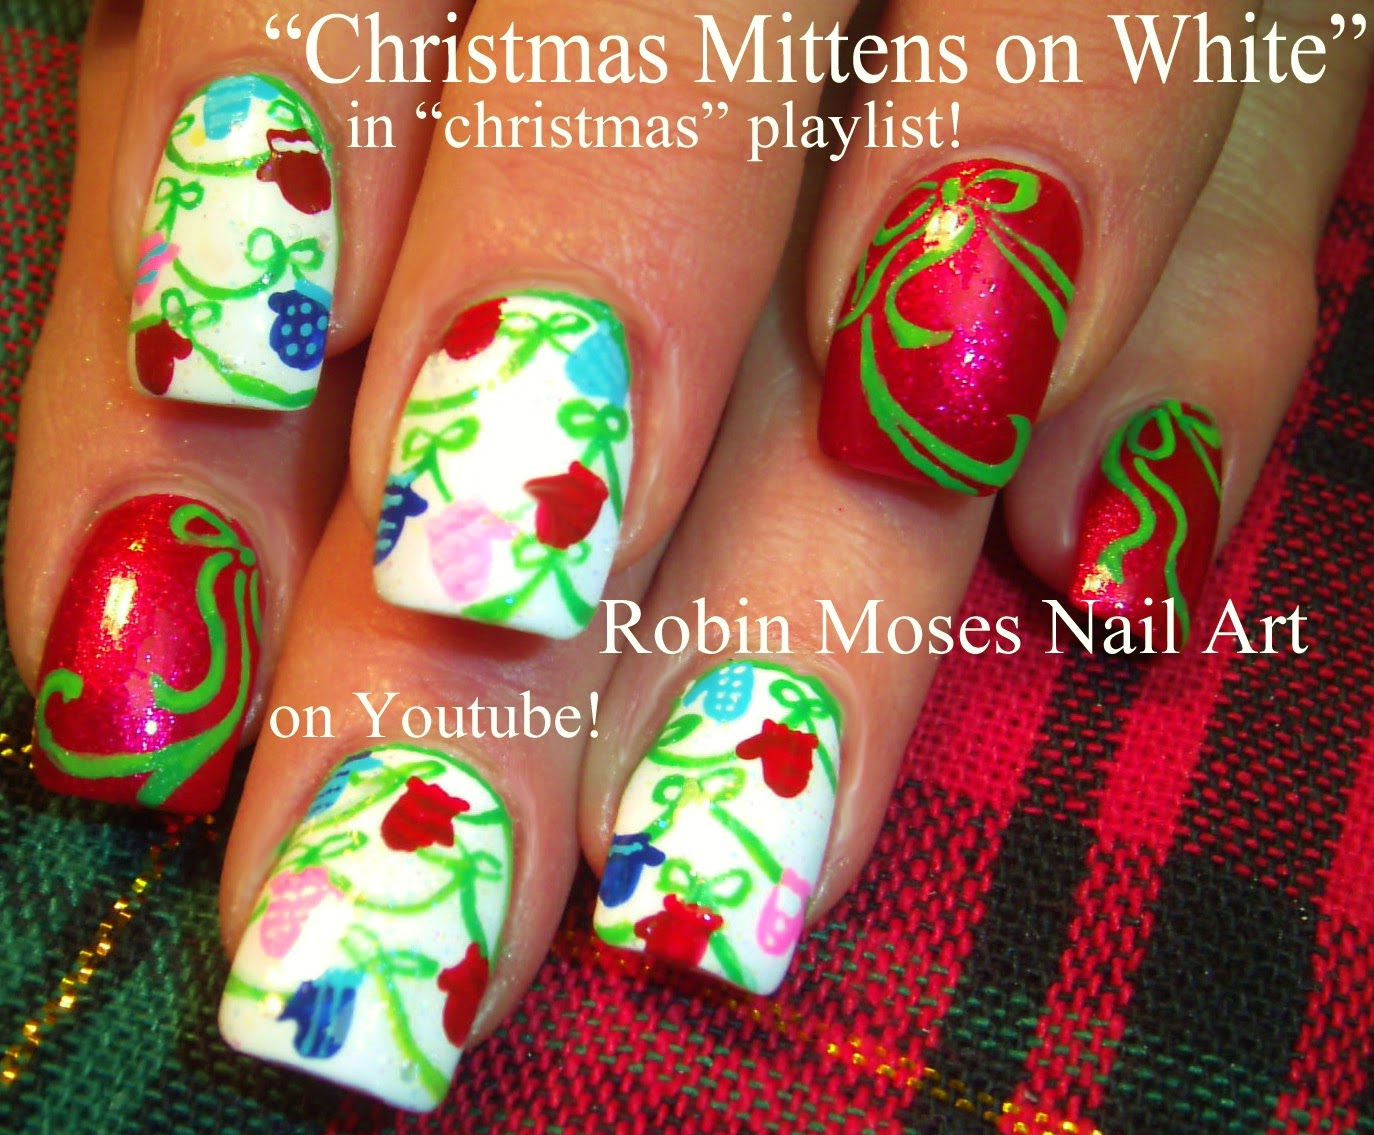 2. Holiday Stiletto Nail Art - wide 7